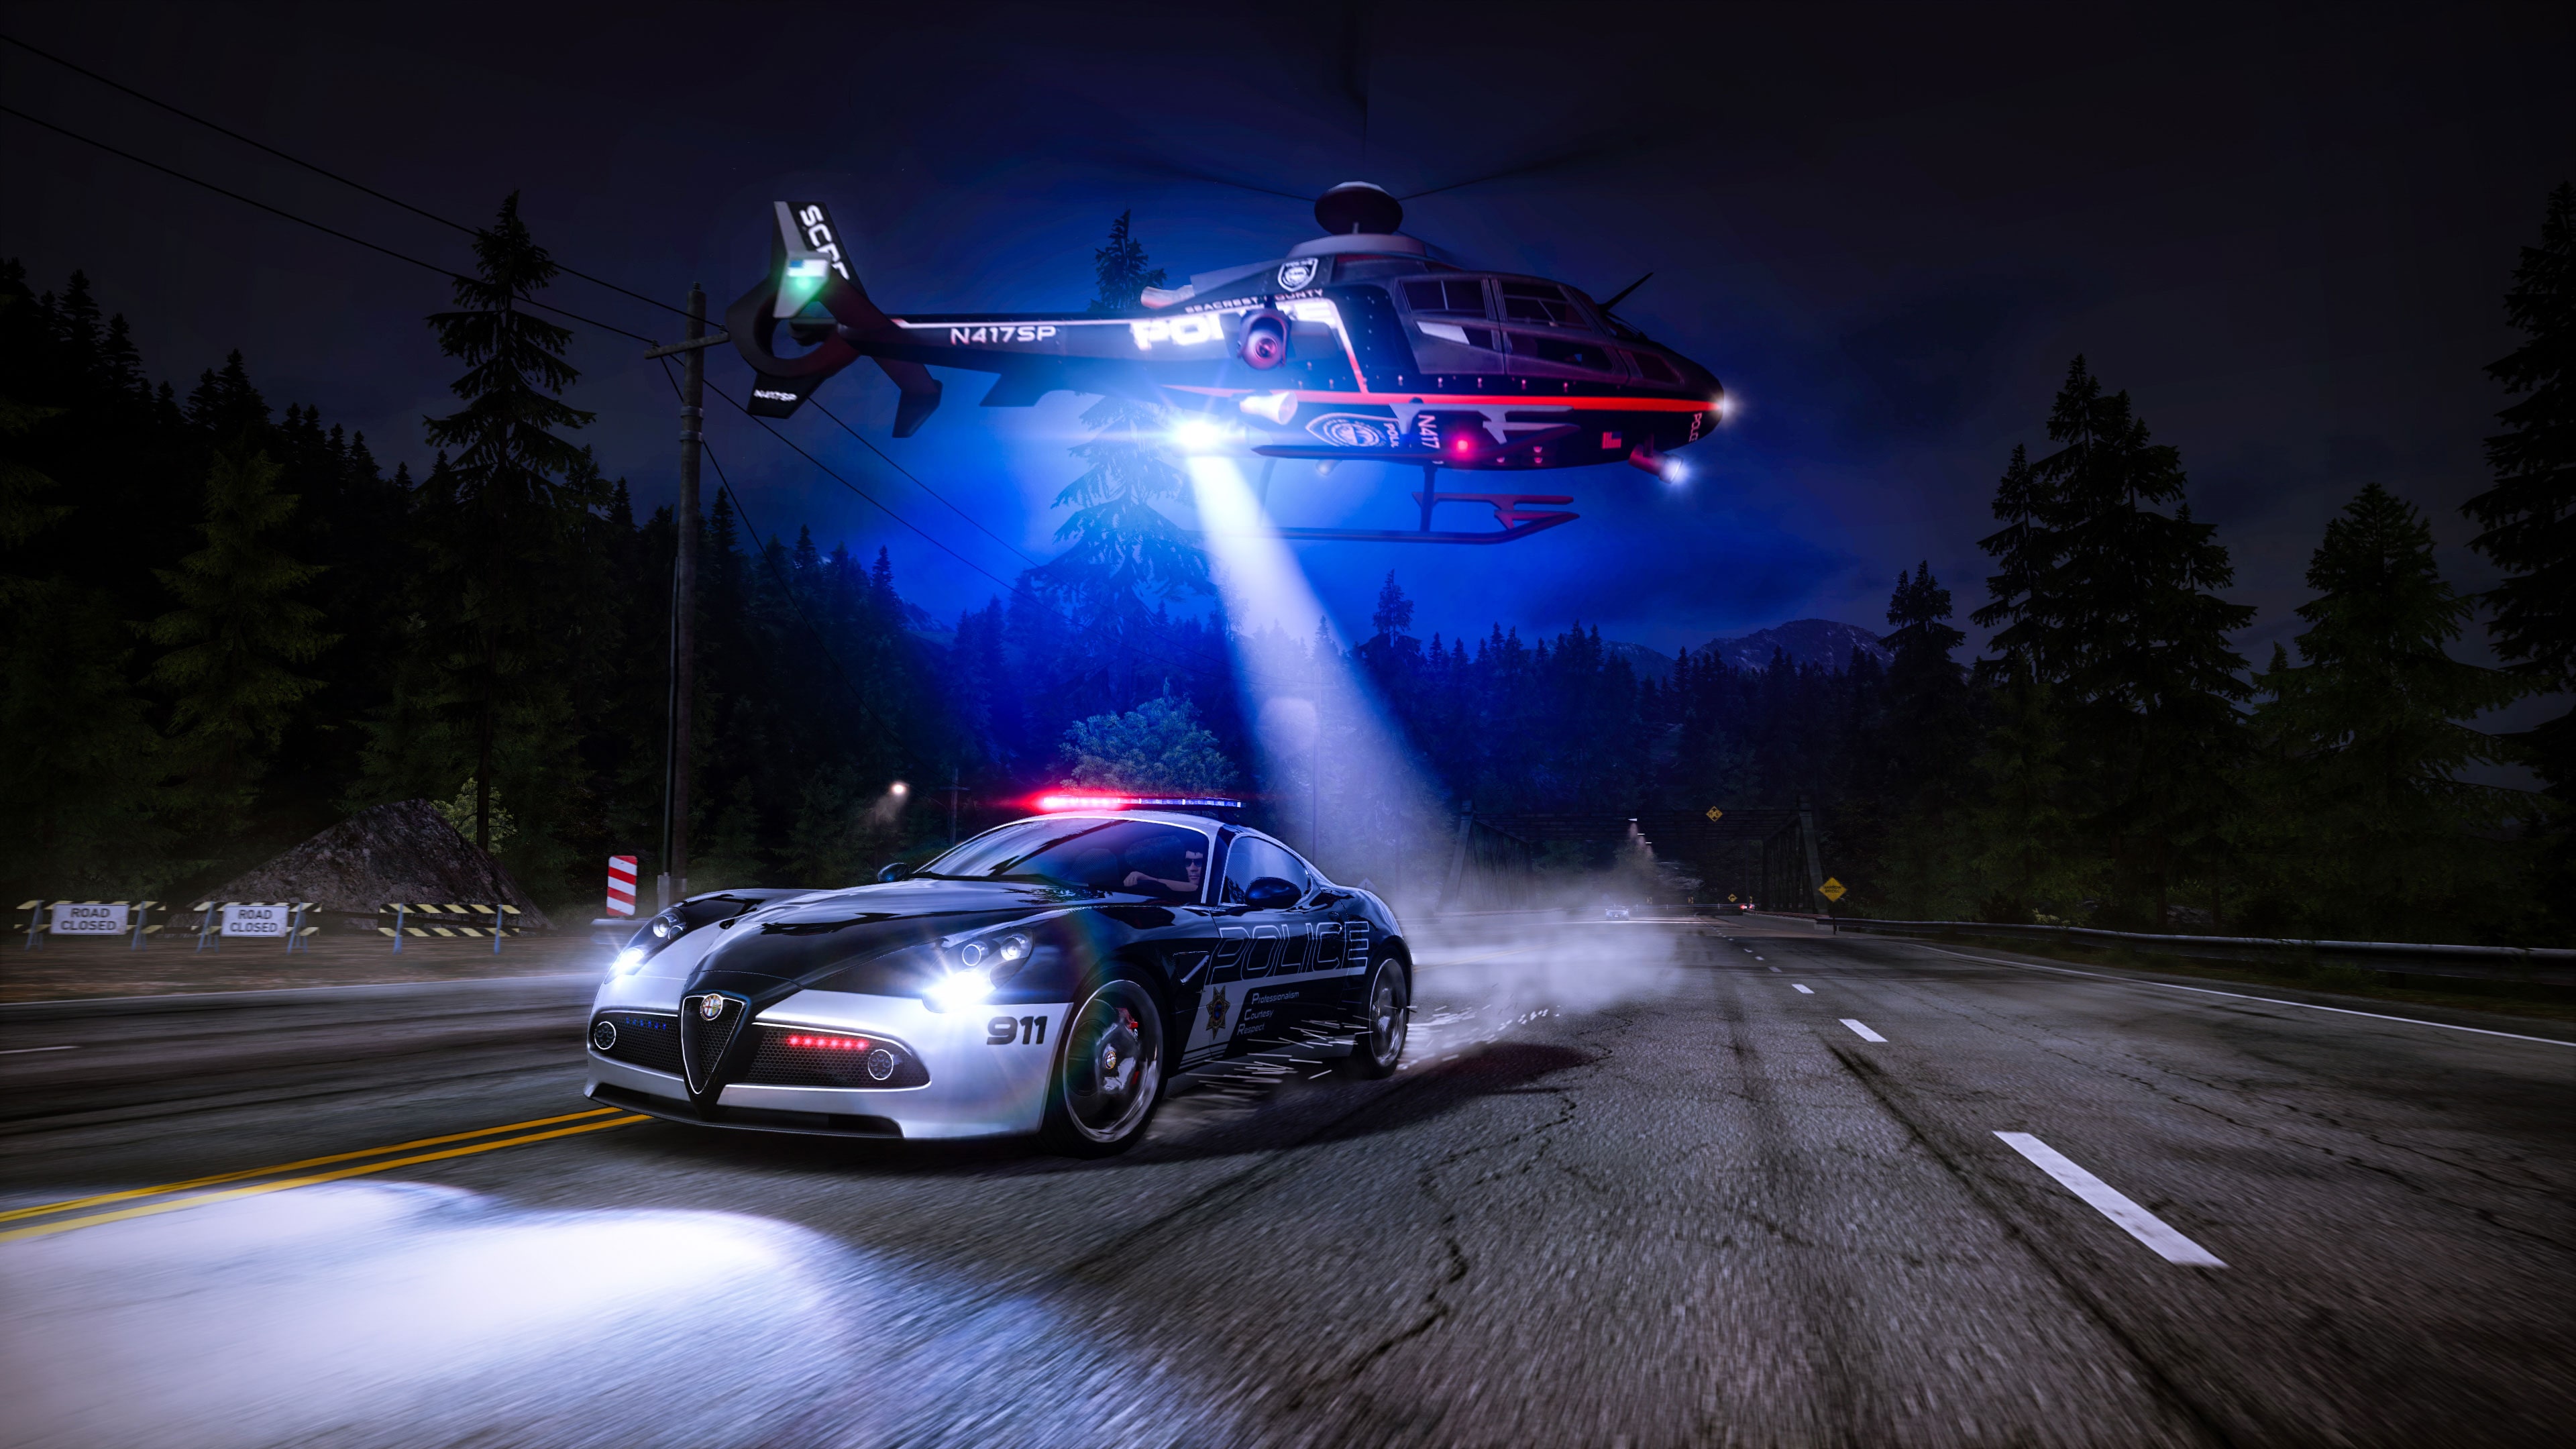 need for speed ps4 store